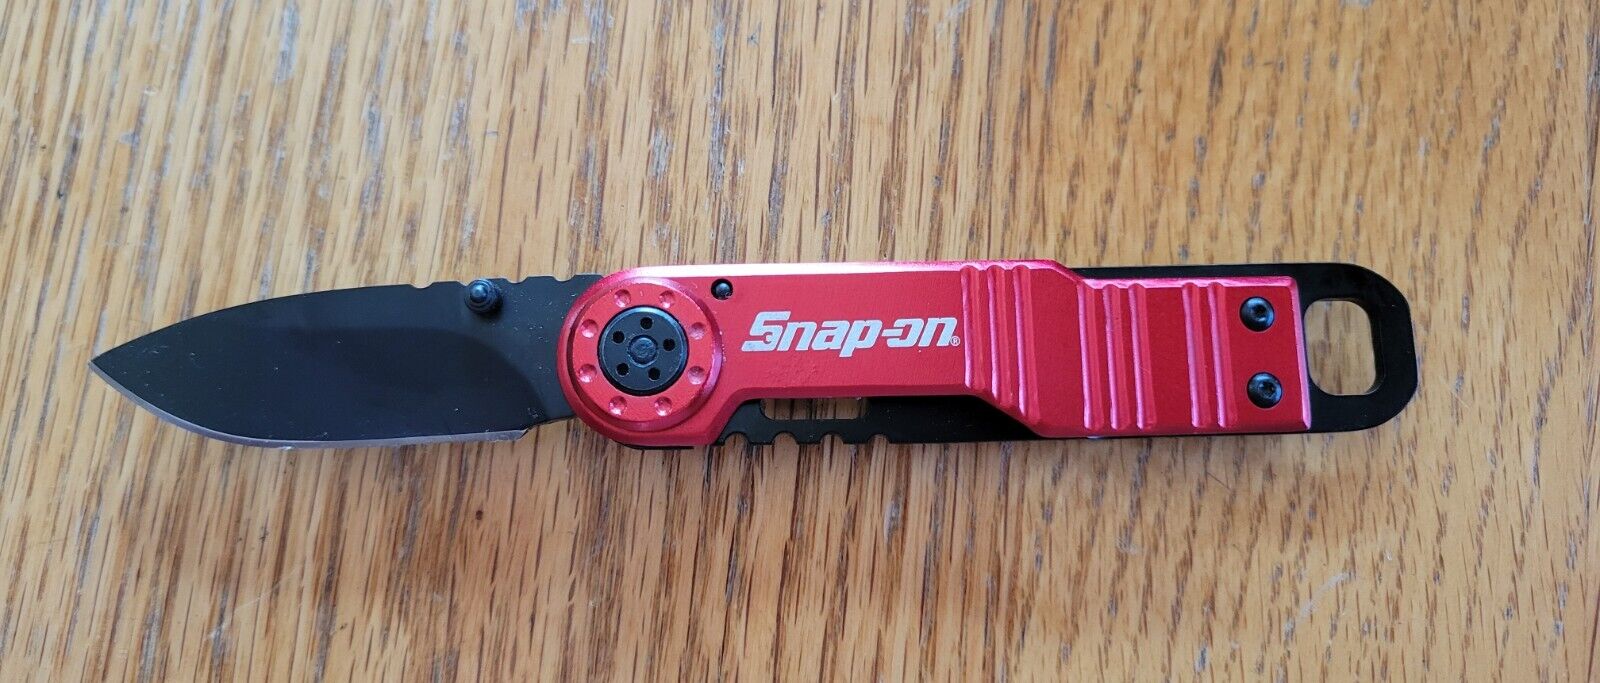 SNAP ON TOOLS Knife 5230 Tactical Frame Lock Red & Black